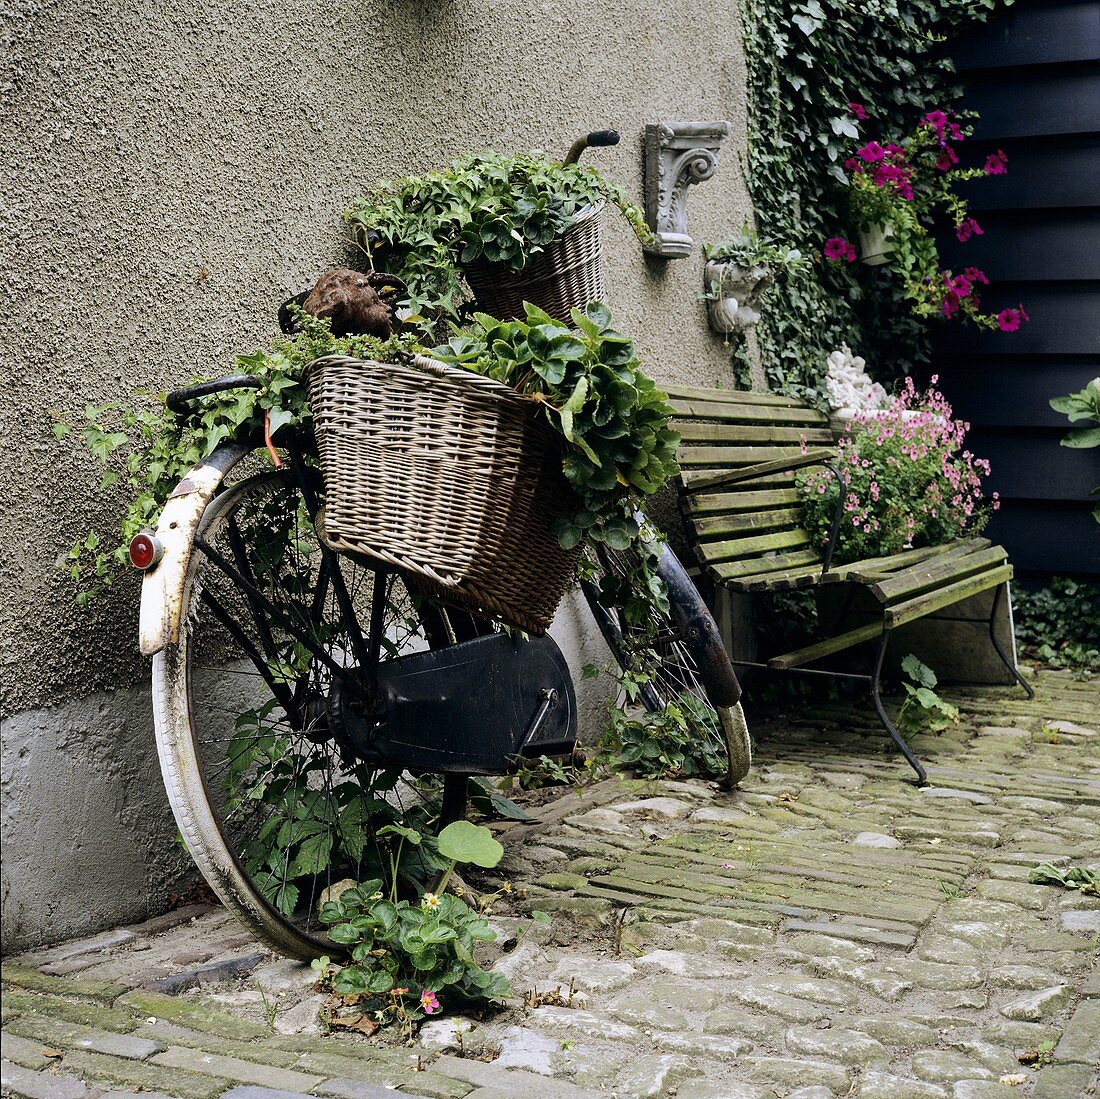 Old bicycle with plants in baskets (garden ornament)